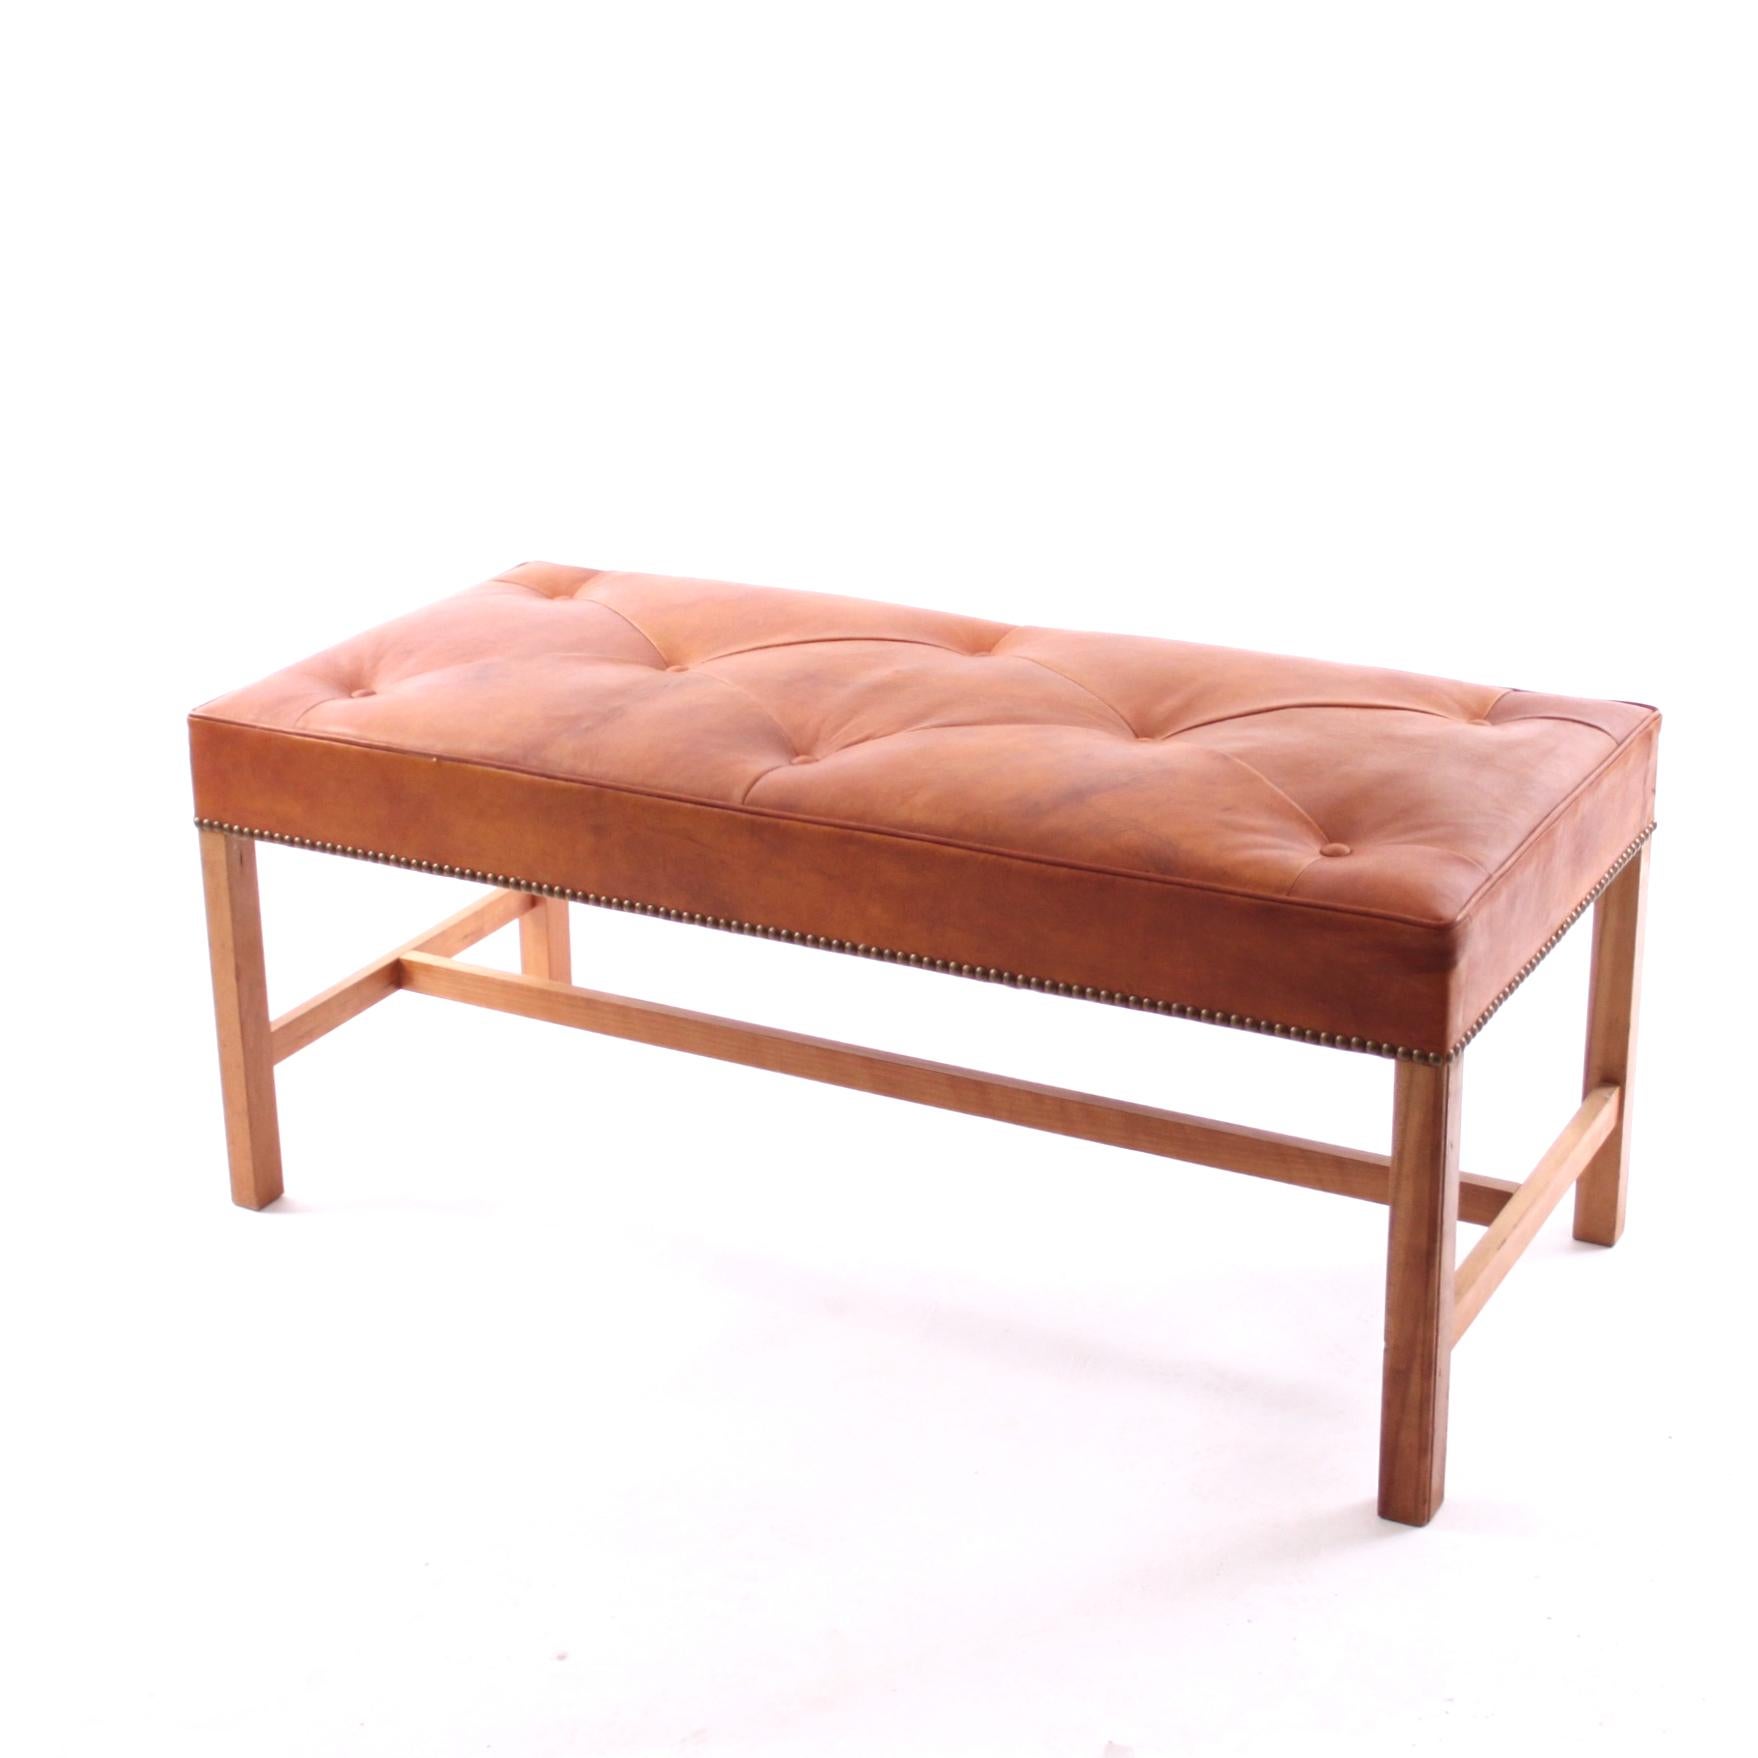 Scandinavian Modern Pair of Josef Frank Benches, Mahogany and Niger leather, 1950s